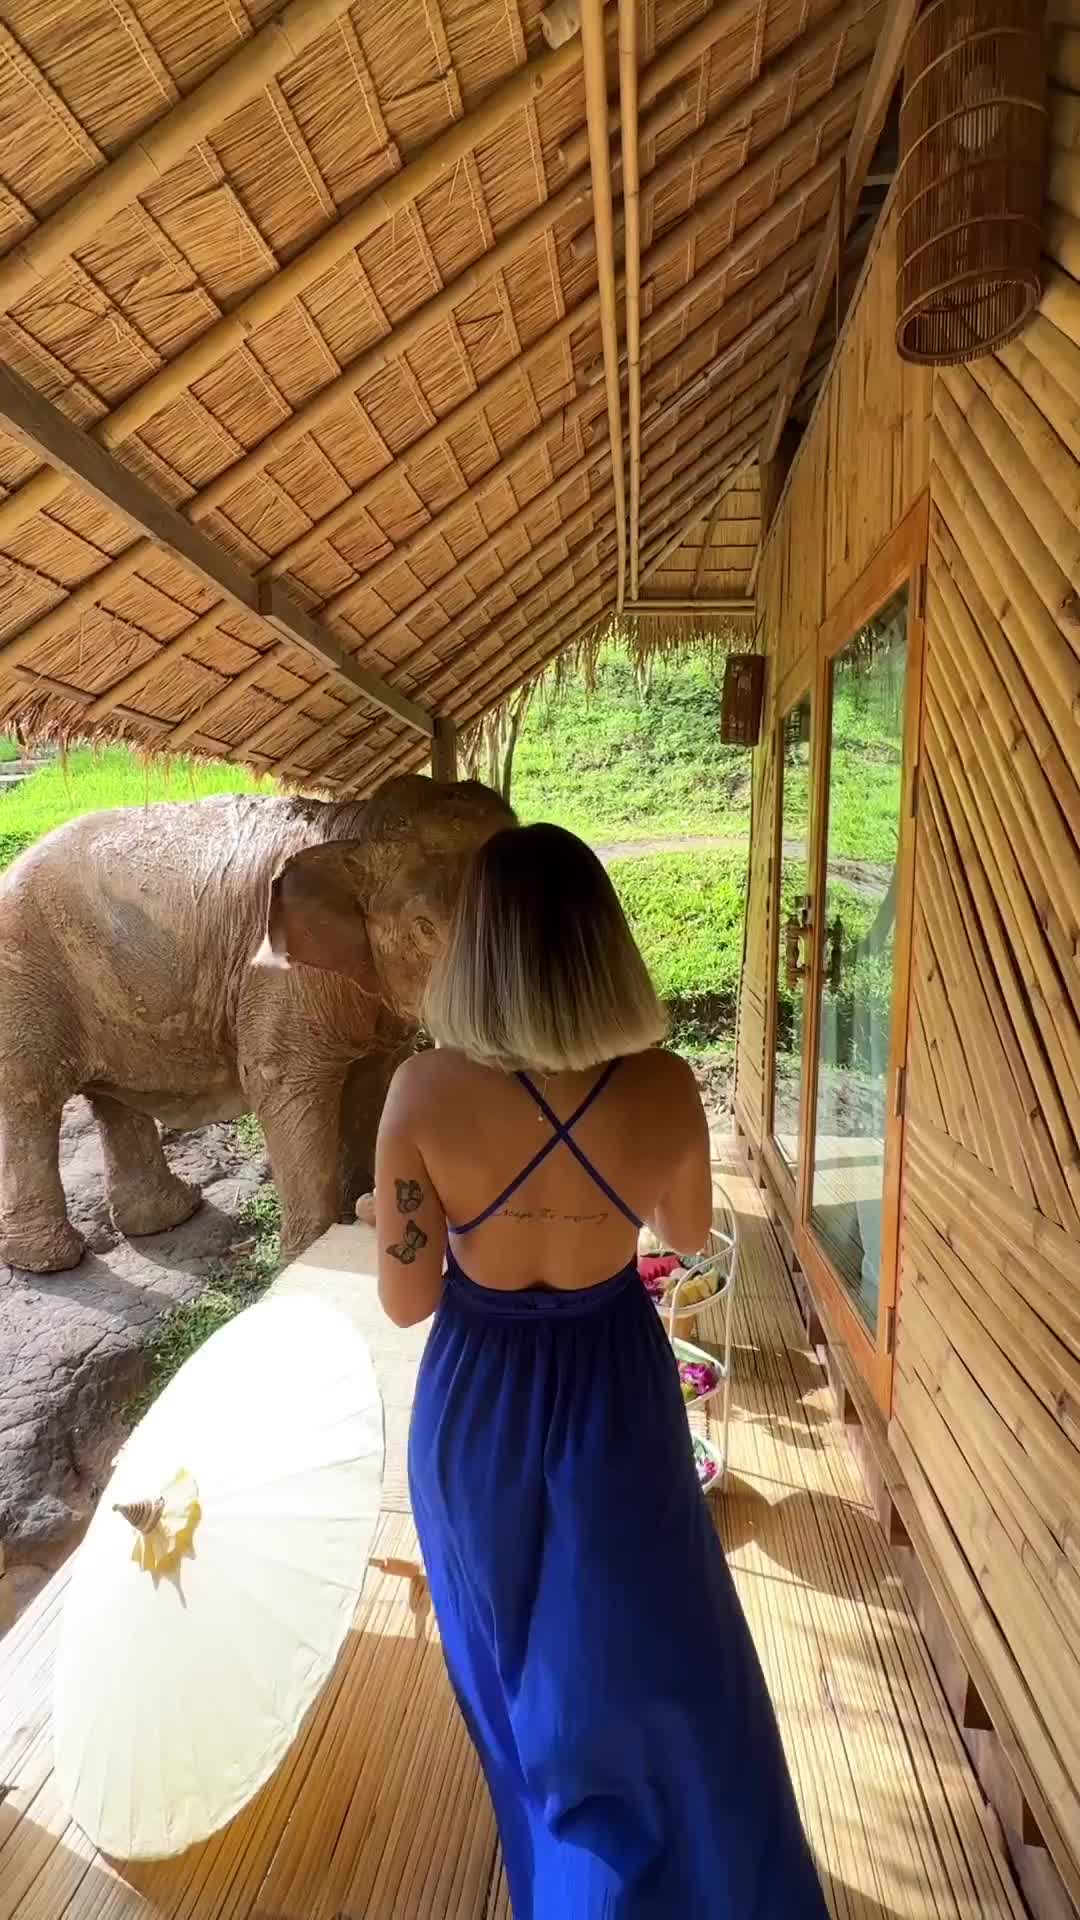 Breakfast with Elephants at Chai Lai Orchid, Thailand